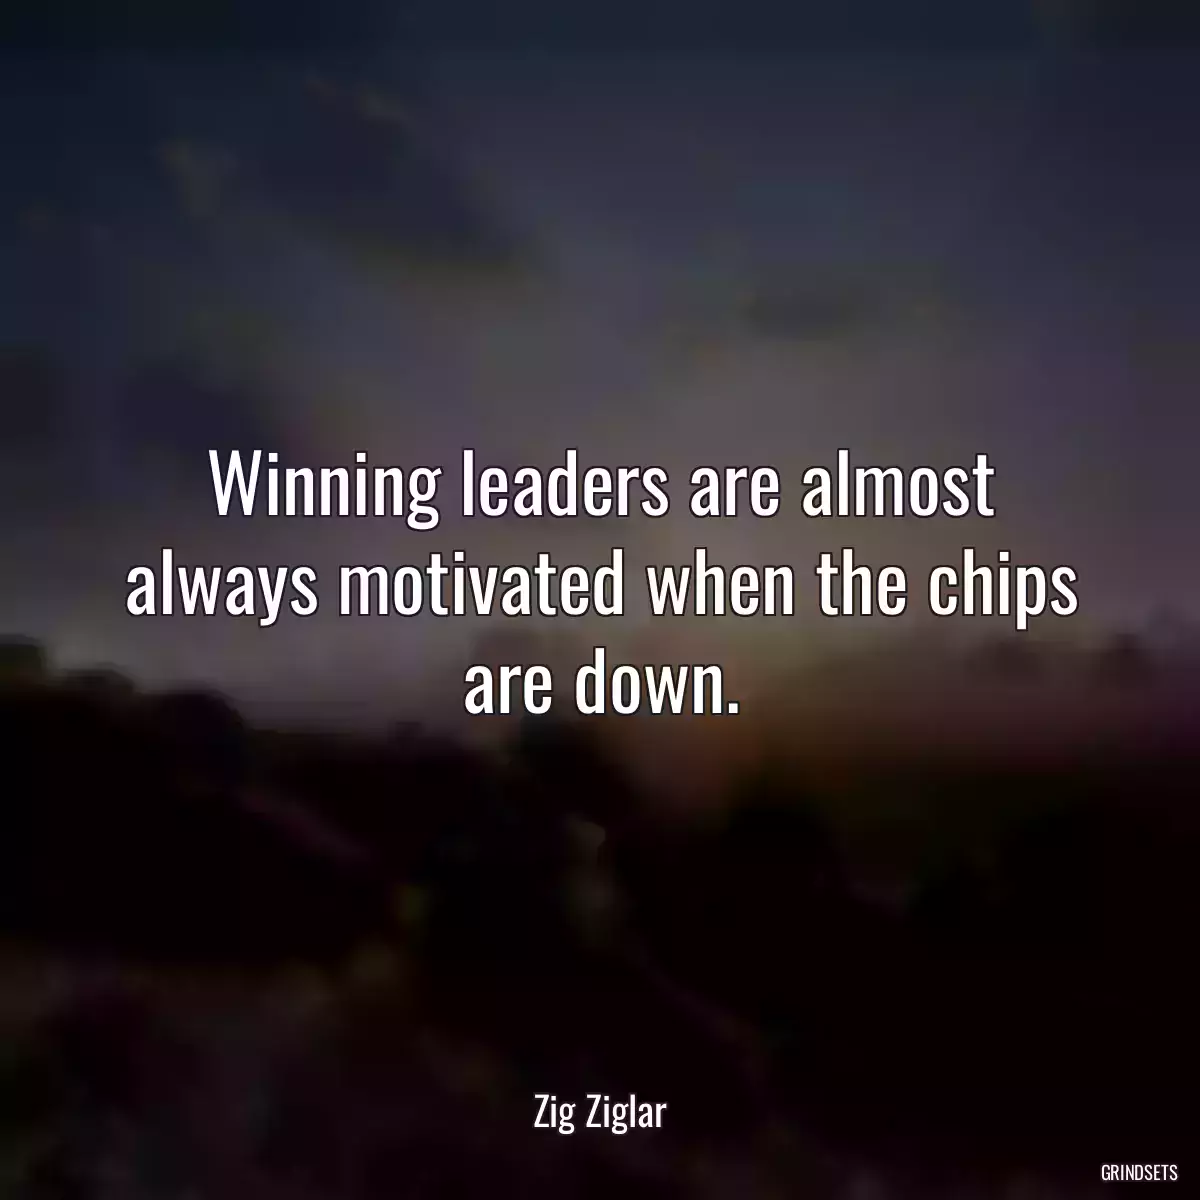 Winning leaders are almost always motivated when the chips are down.